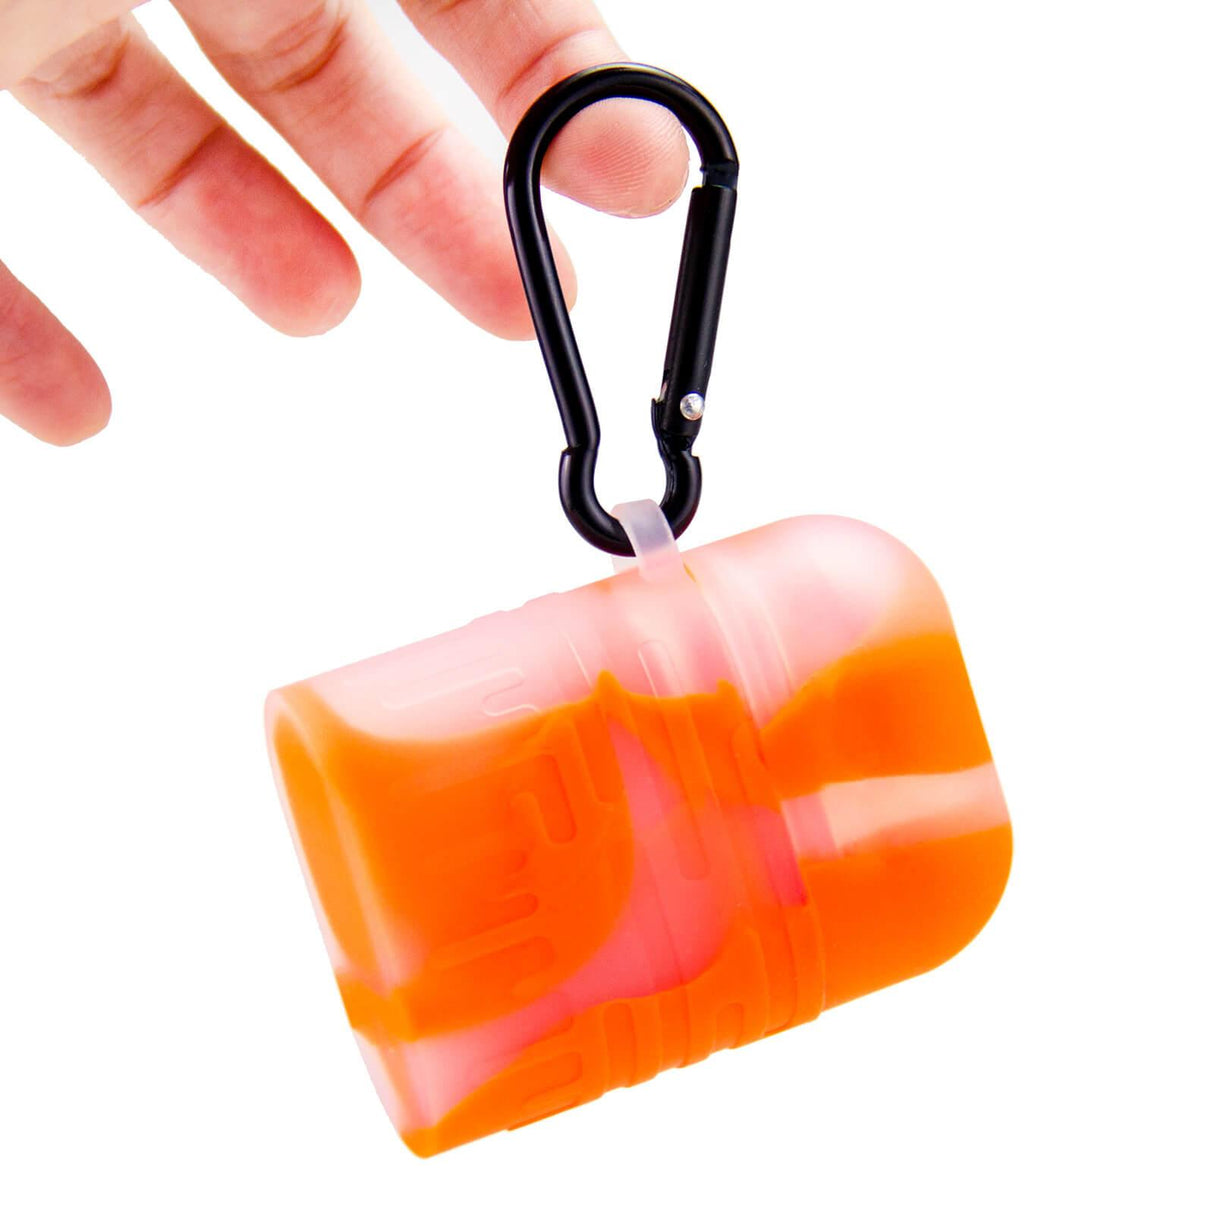 Orange Silicone One Hitter Dugout with Keychain by PILOT DIARY held by fingers, white background